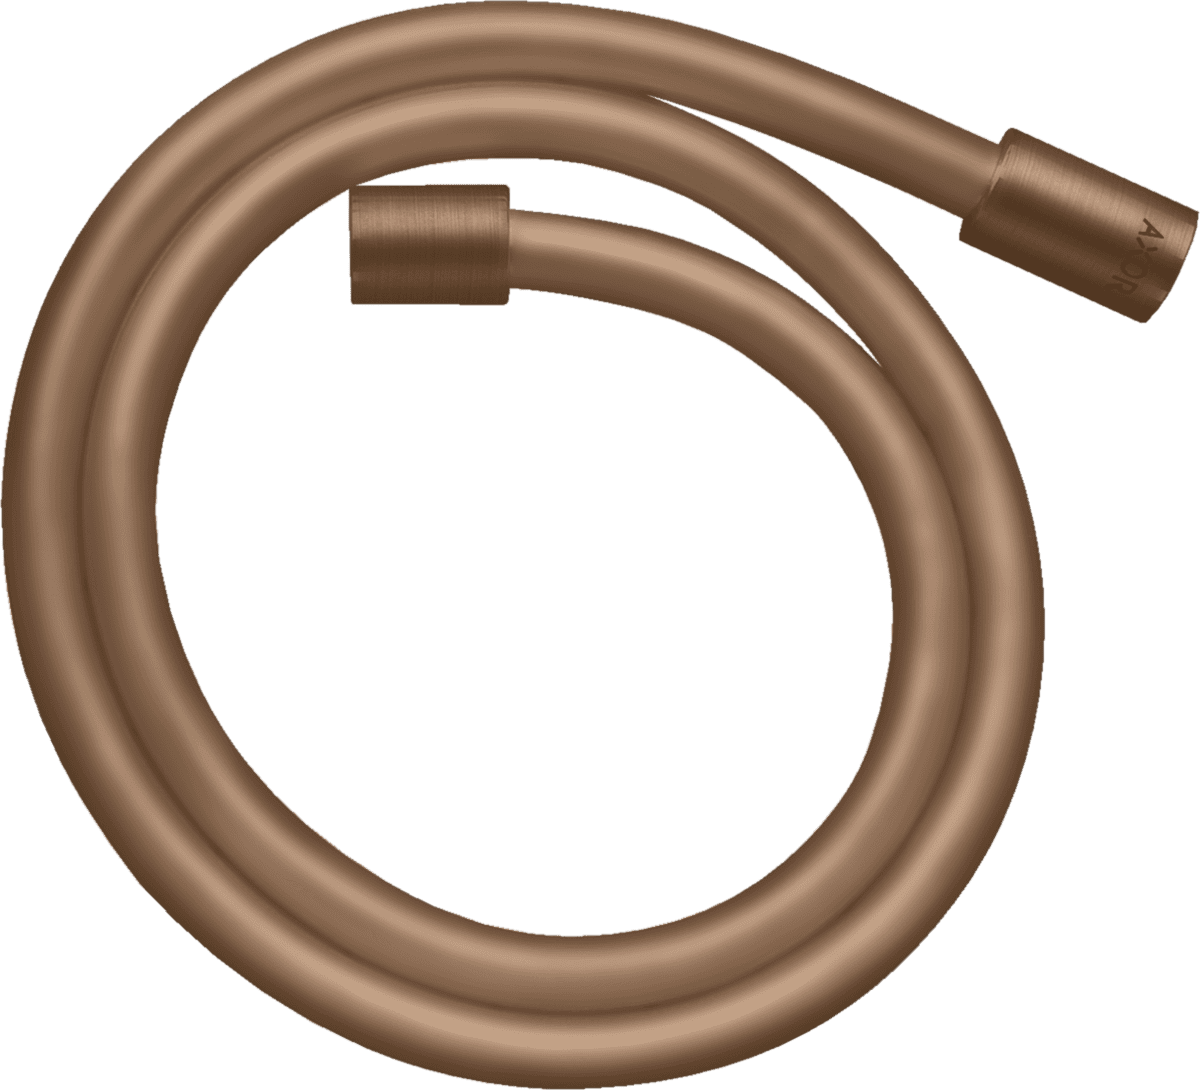 HANSGROHE AXOR Starck Metal effect shower hose 2.00 m with cylindrical nuts #28284310 - Brushed Red Gold resmi